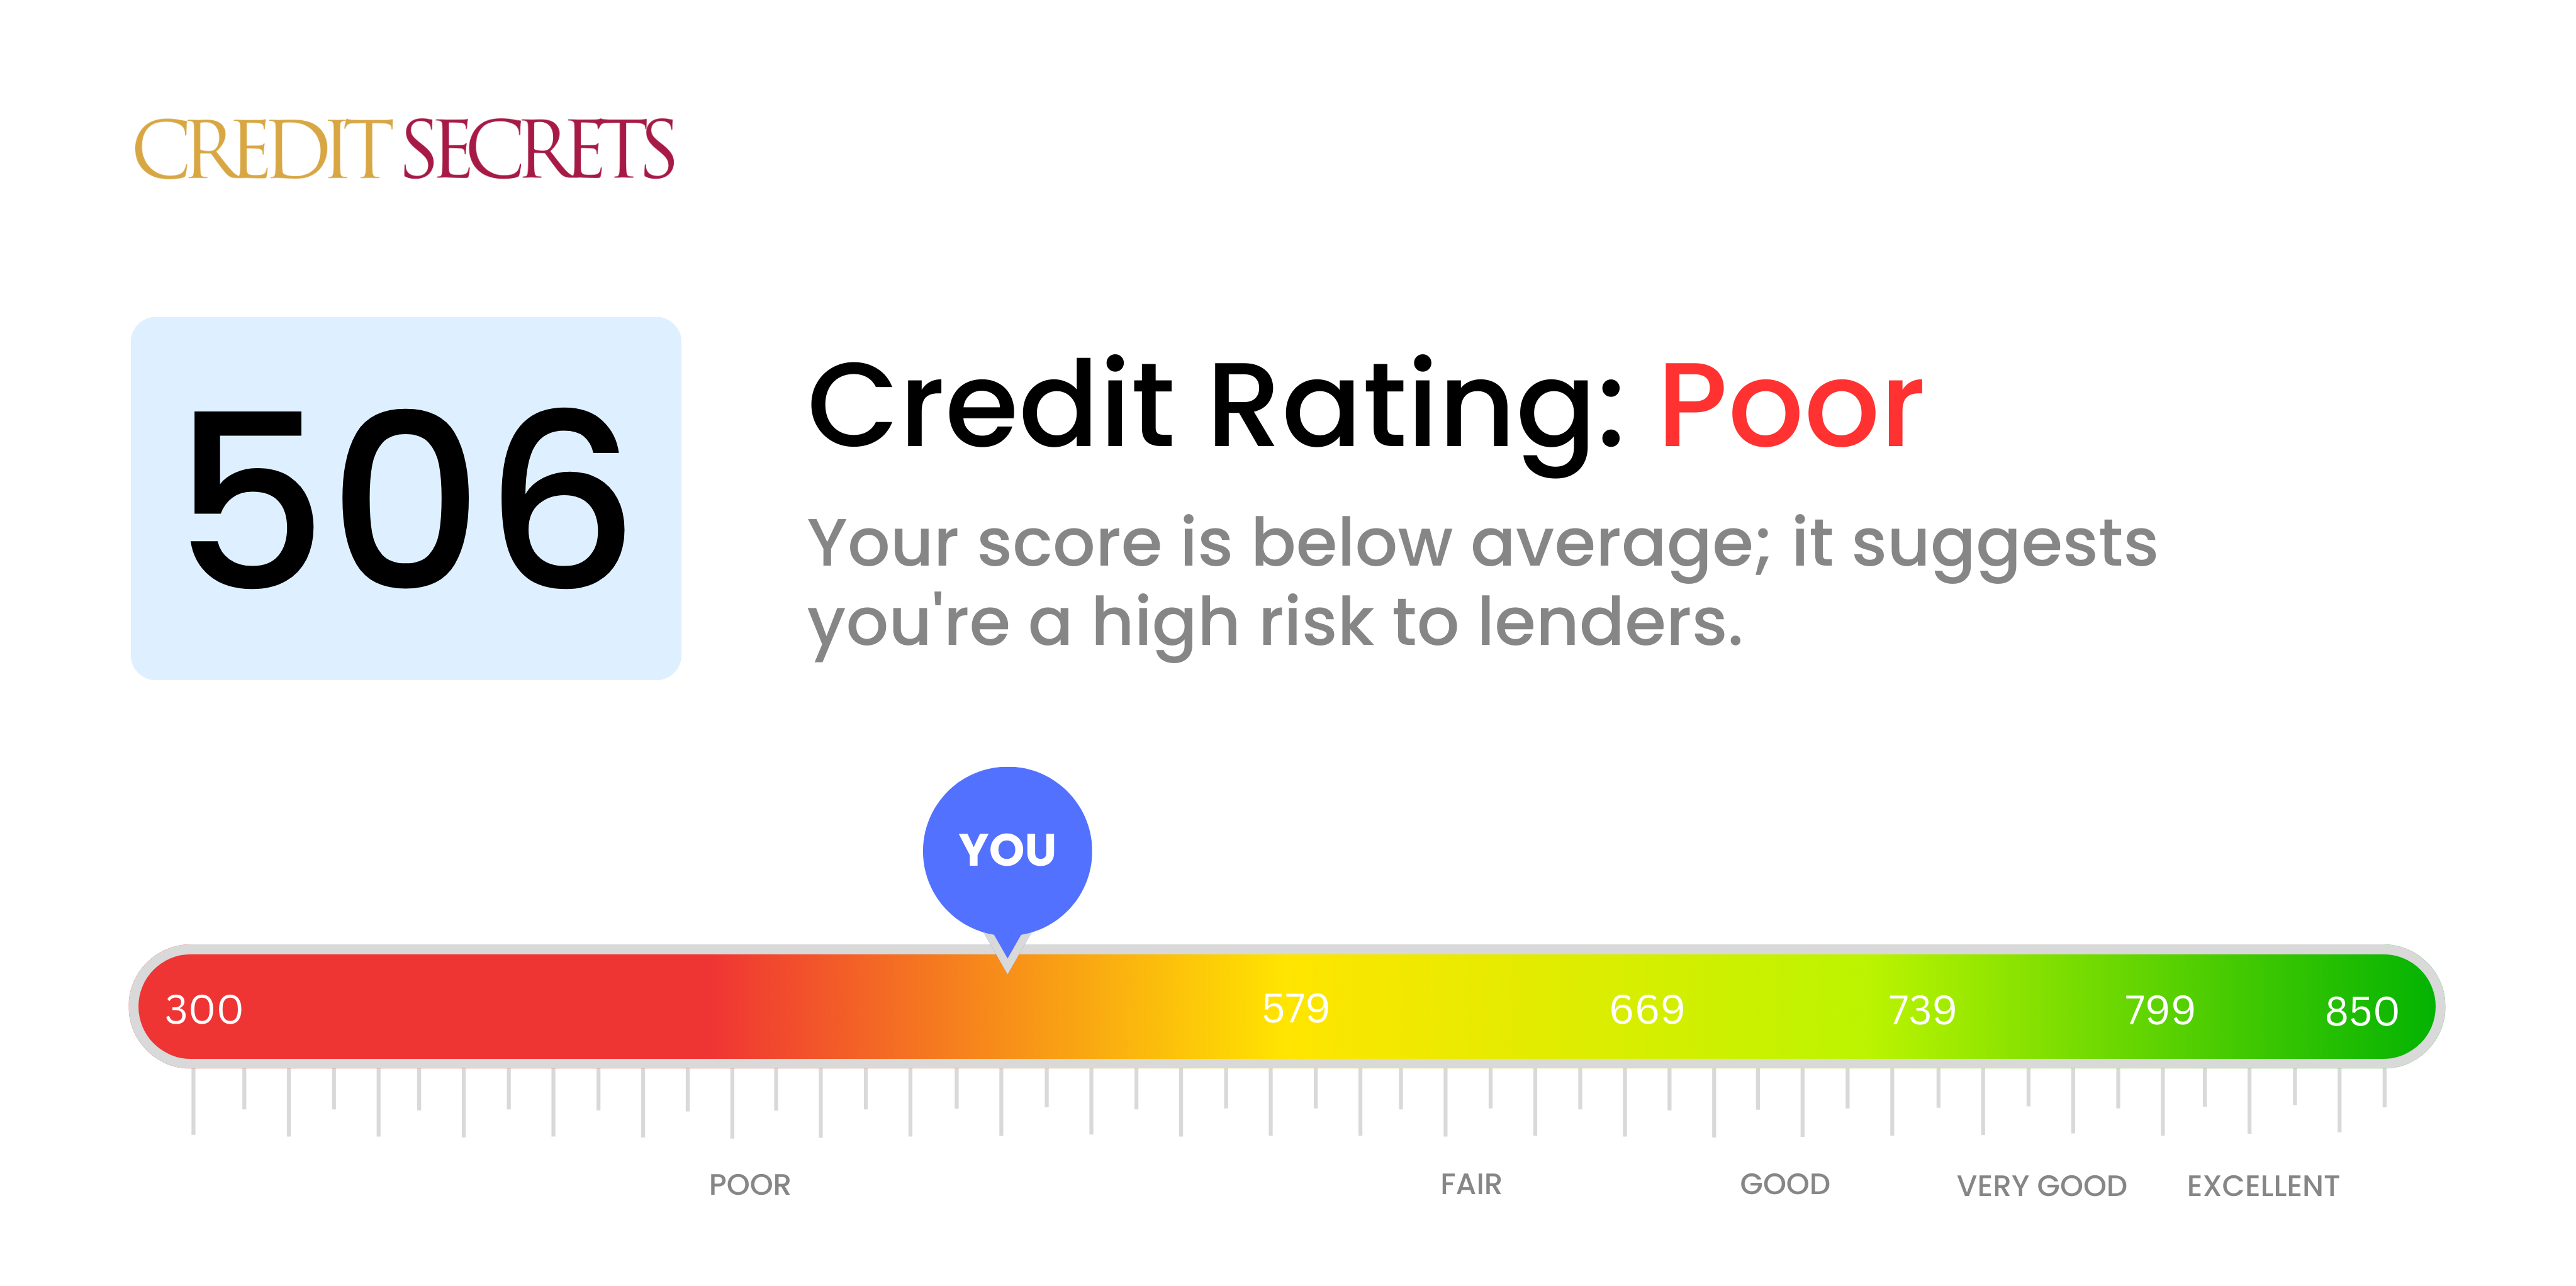 Is 506 a good credit score?